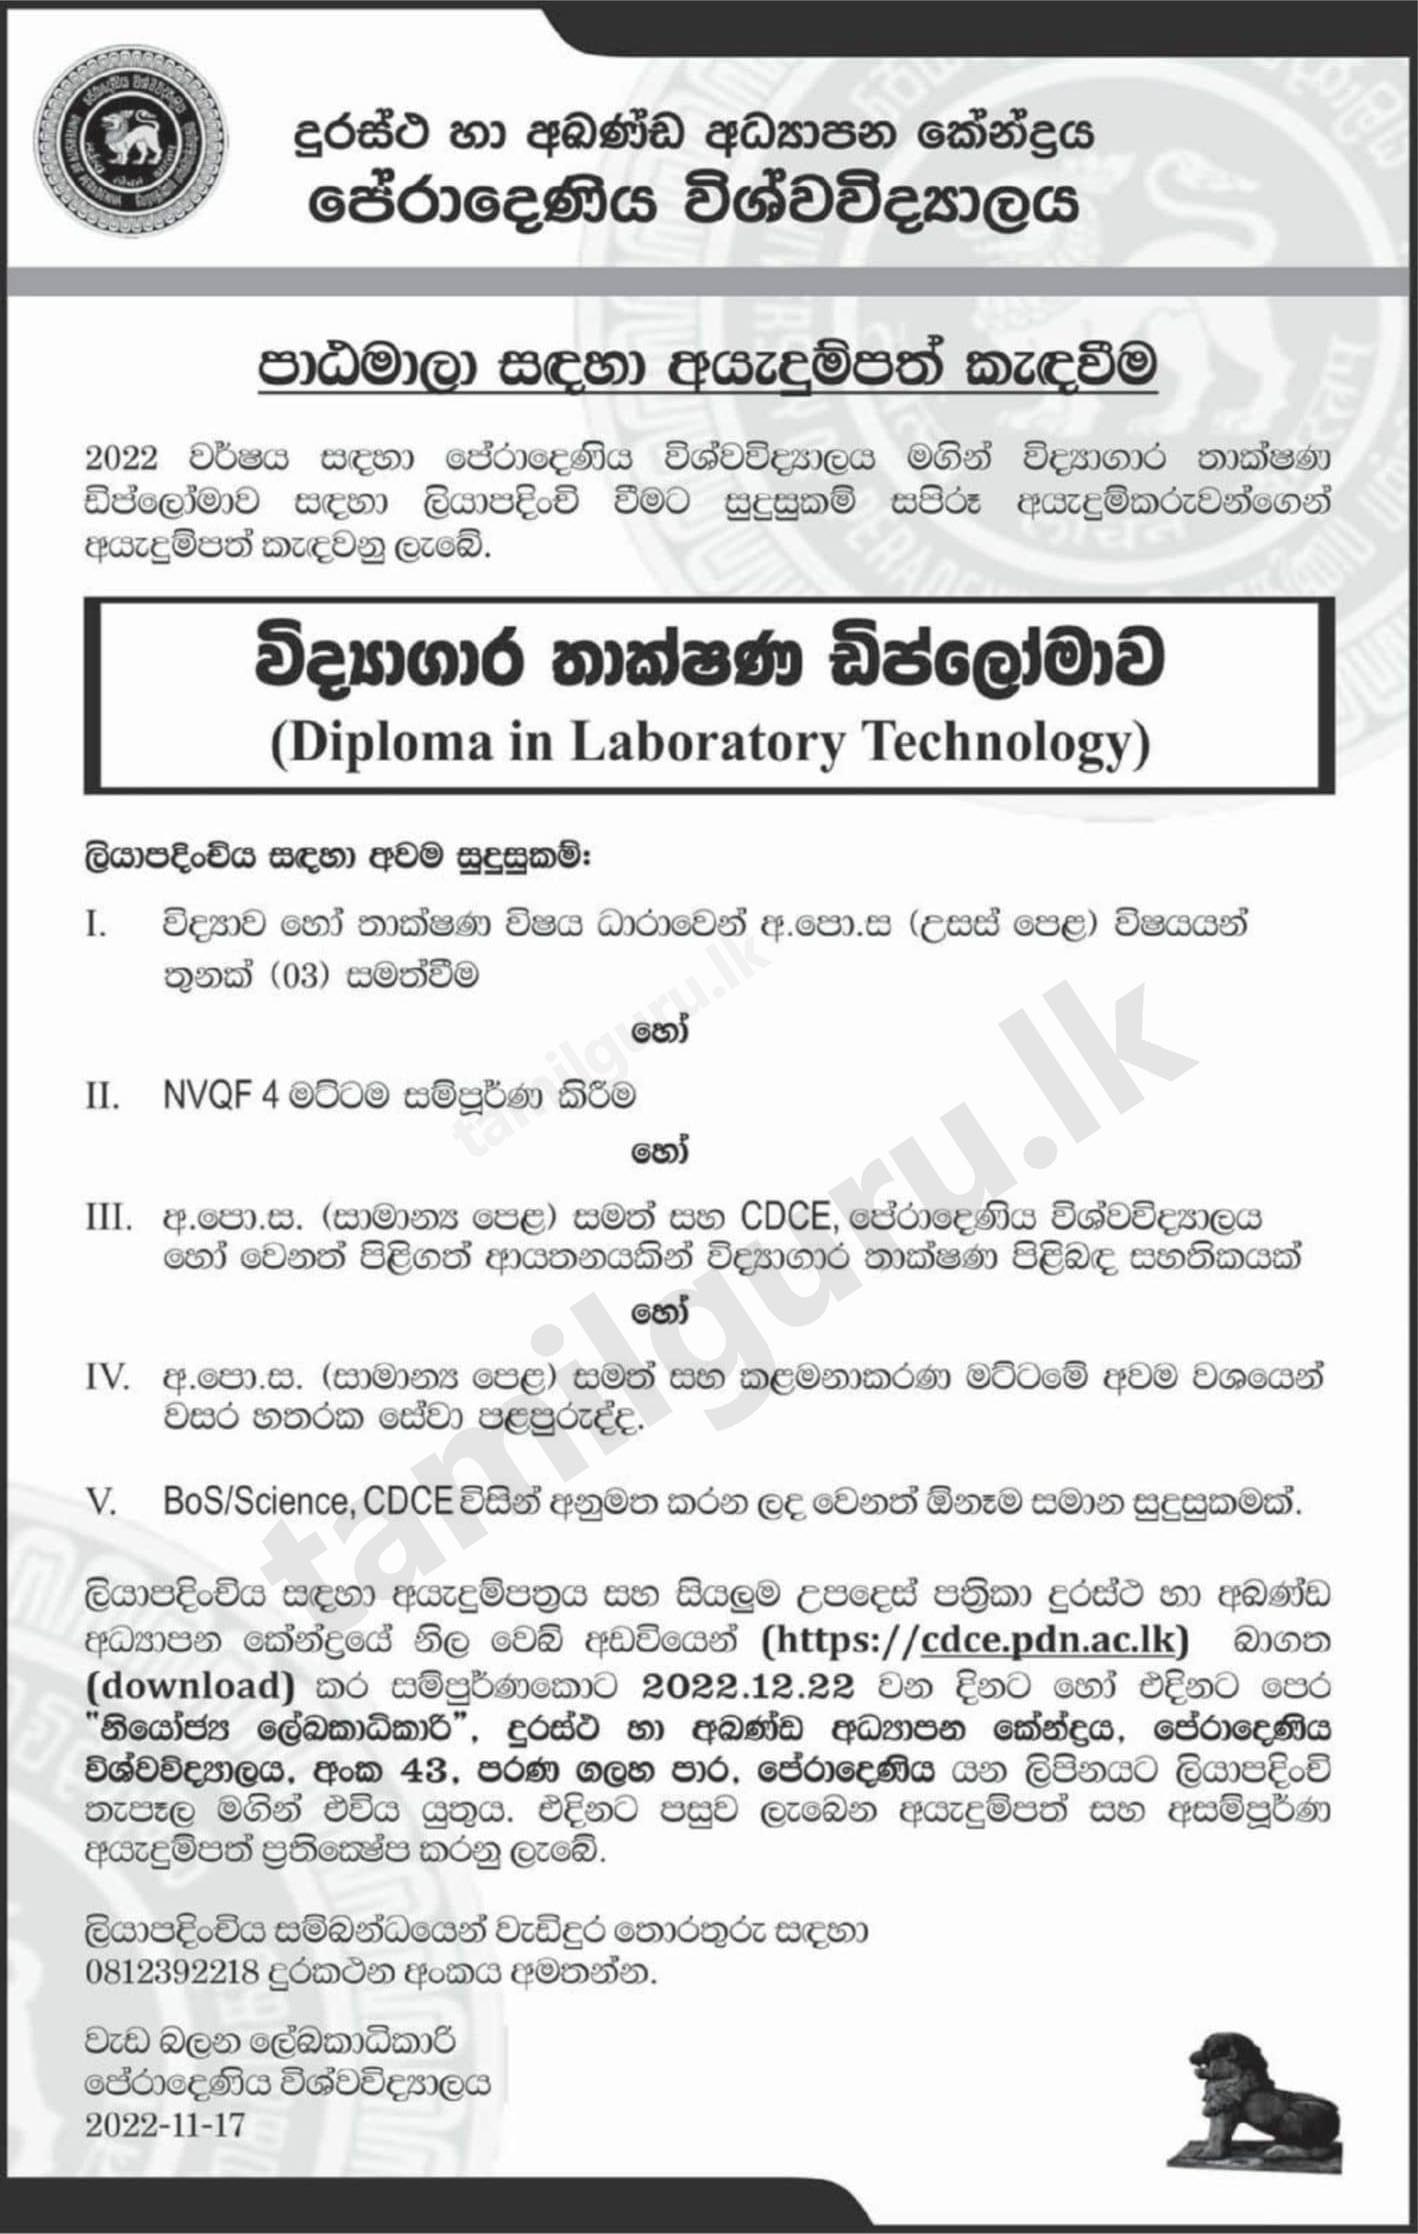 Calling Applications for Diploma in Laboratory Technology (Course) 2022 - University of Peradeniya